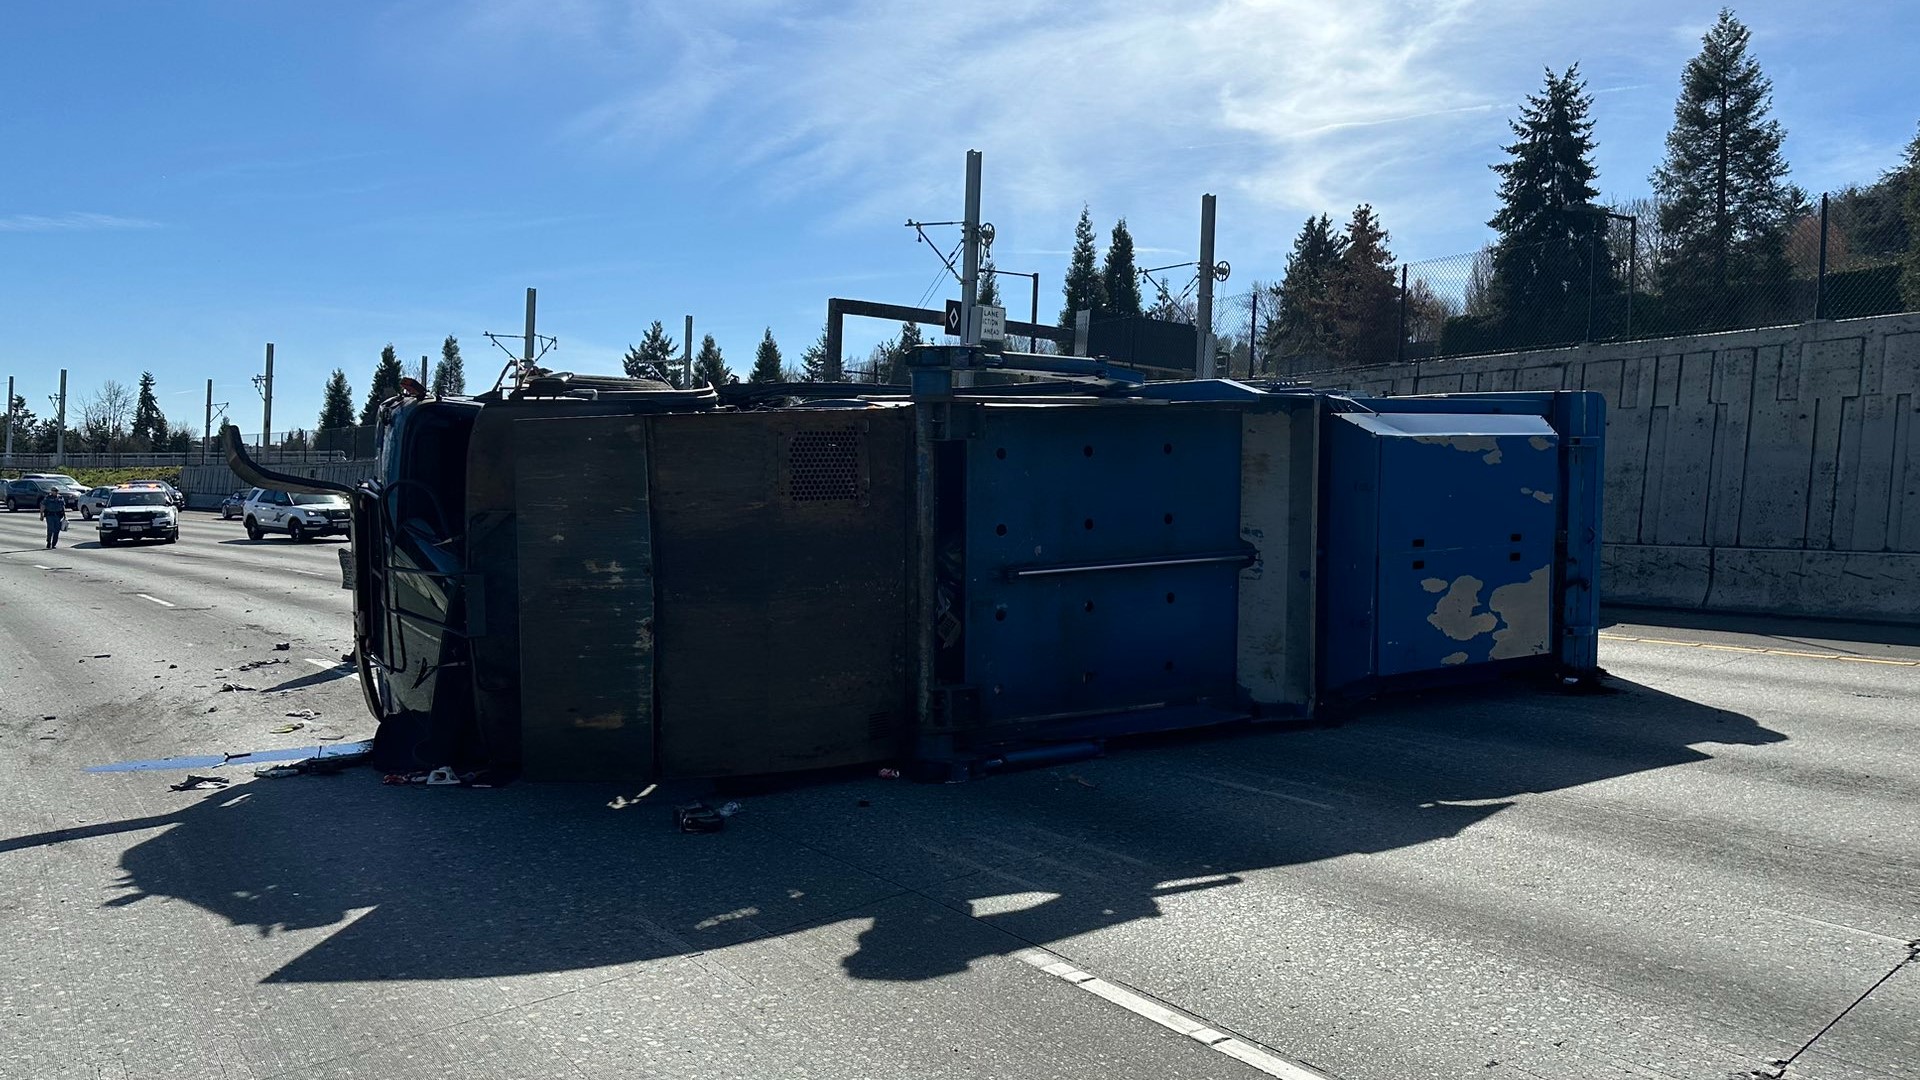 The driver of the truck was injured after it tipped over on the highway, according to the Washington State Patrol.